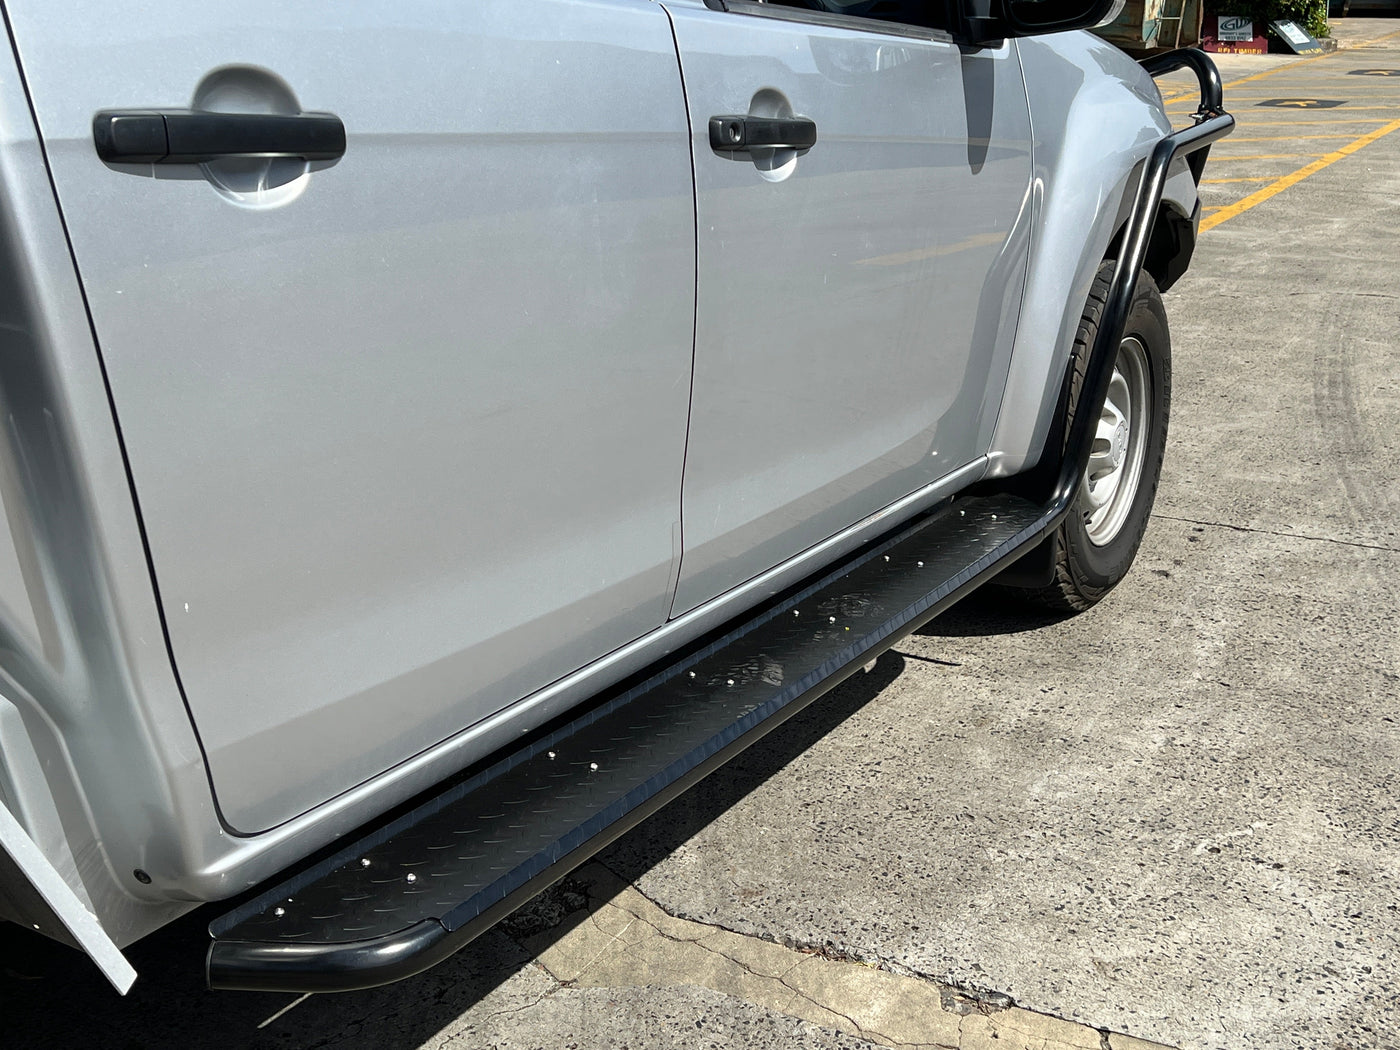 Adjustable Side Steps + Brush Bars Suits All Dual Cab Utes